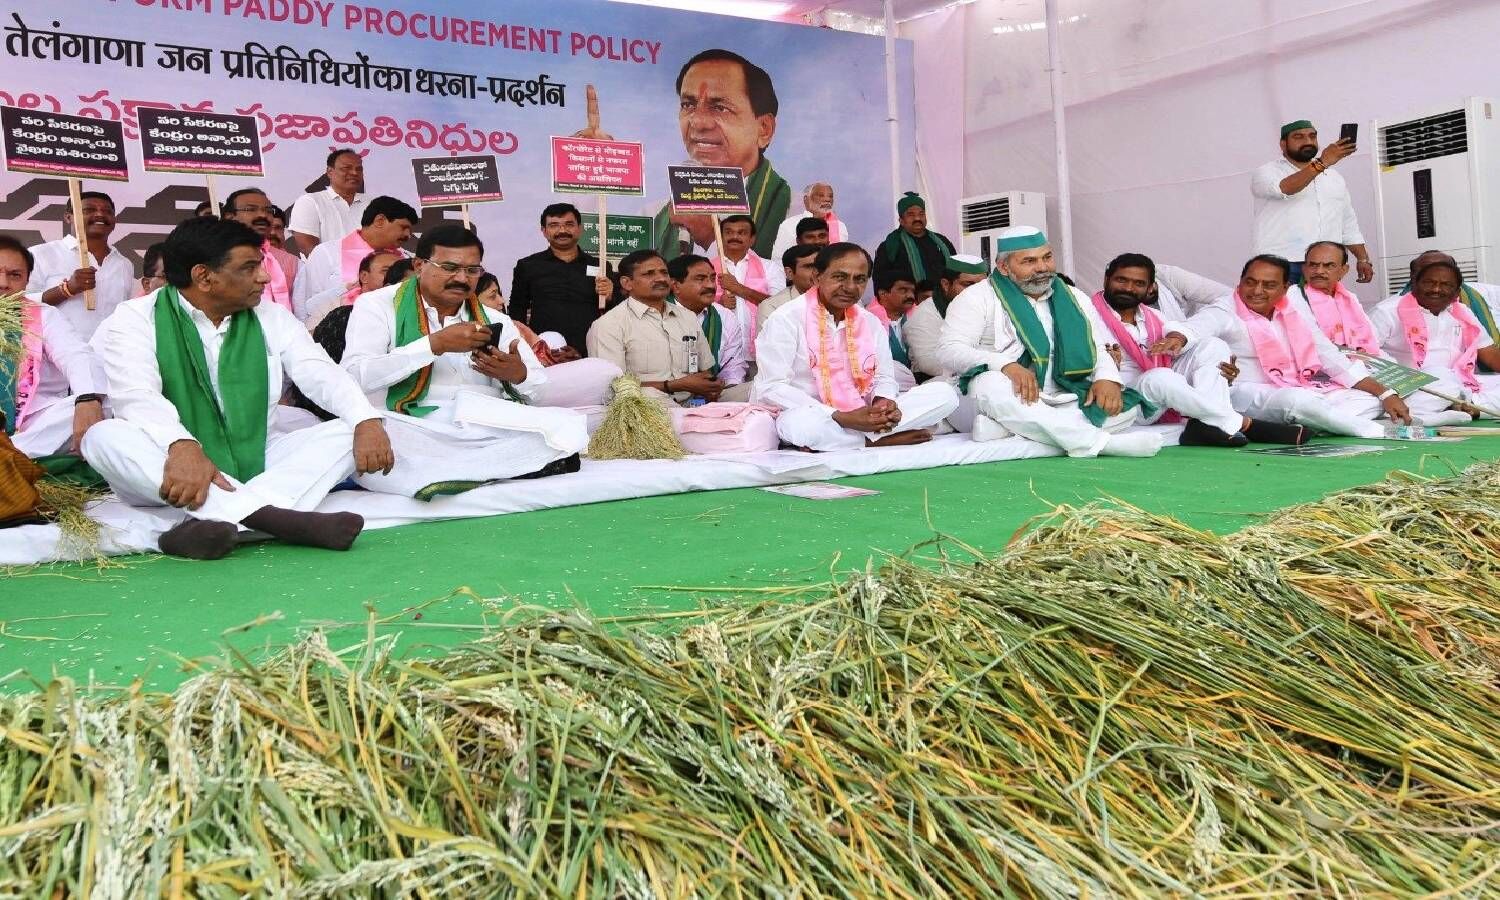 KCR gives the position 24 hours to decide on the purchase of rice